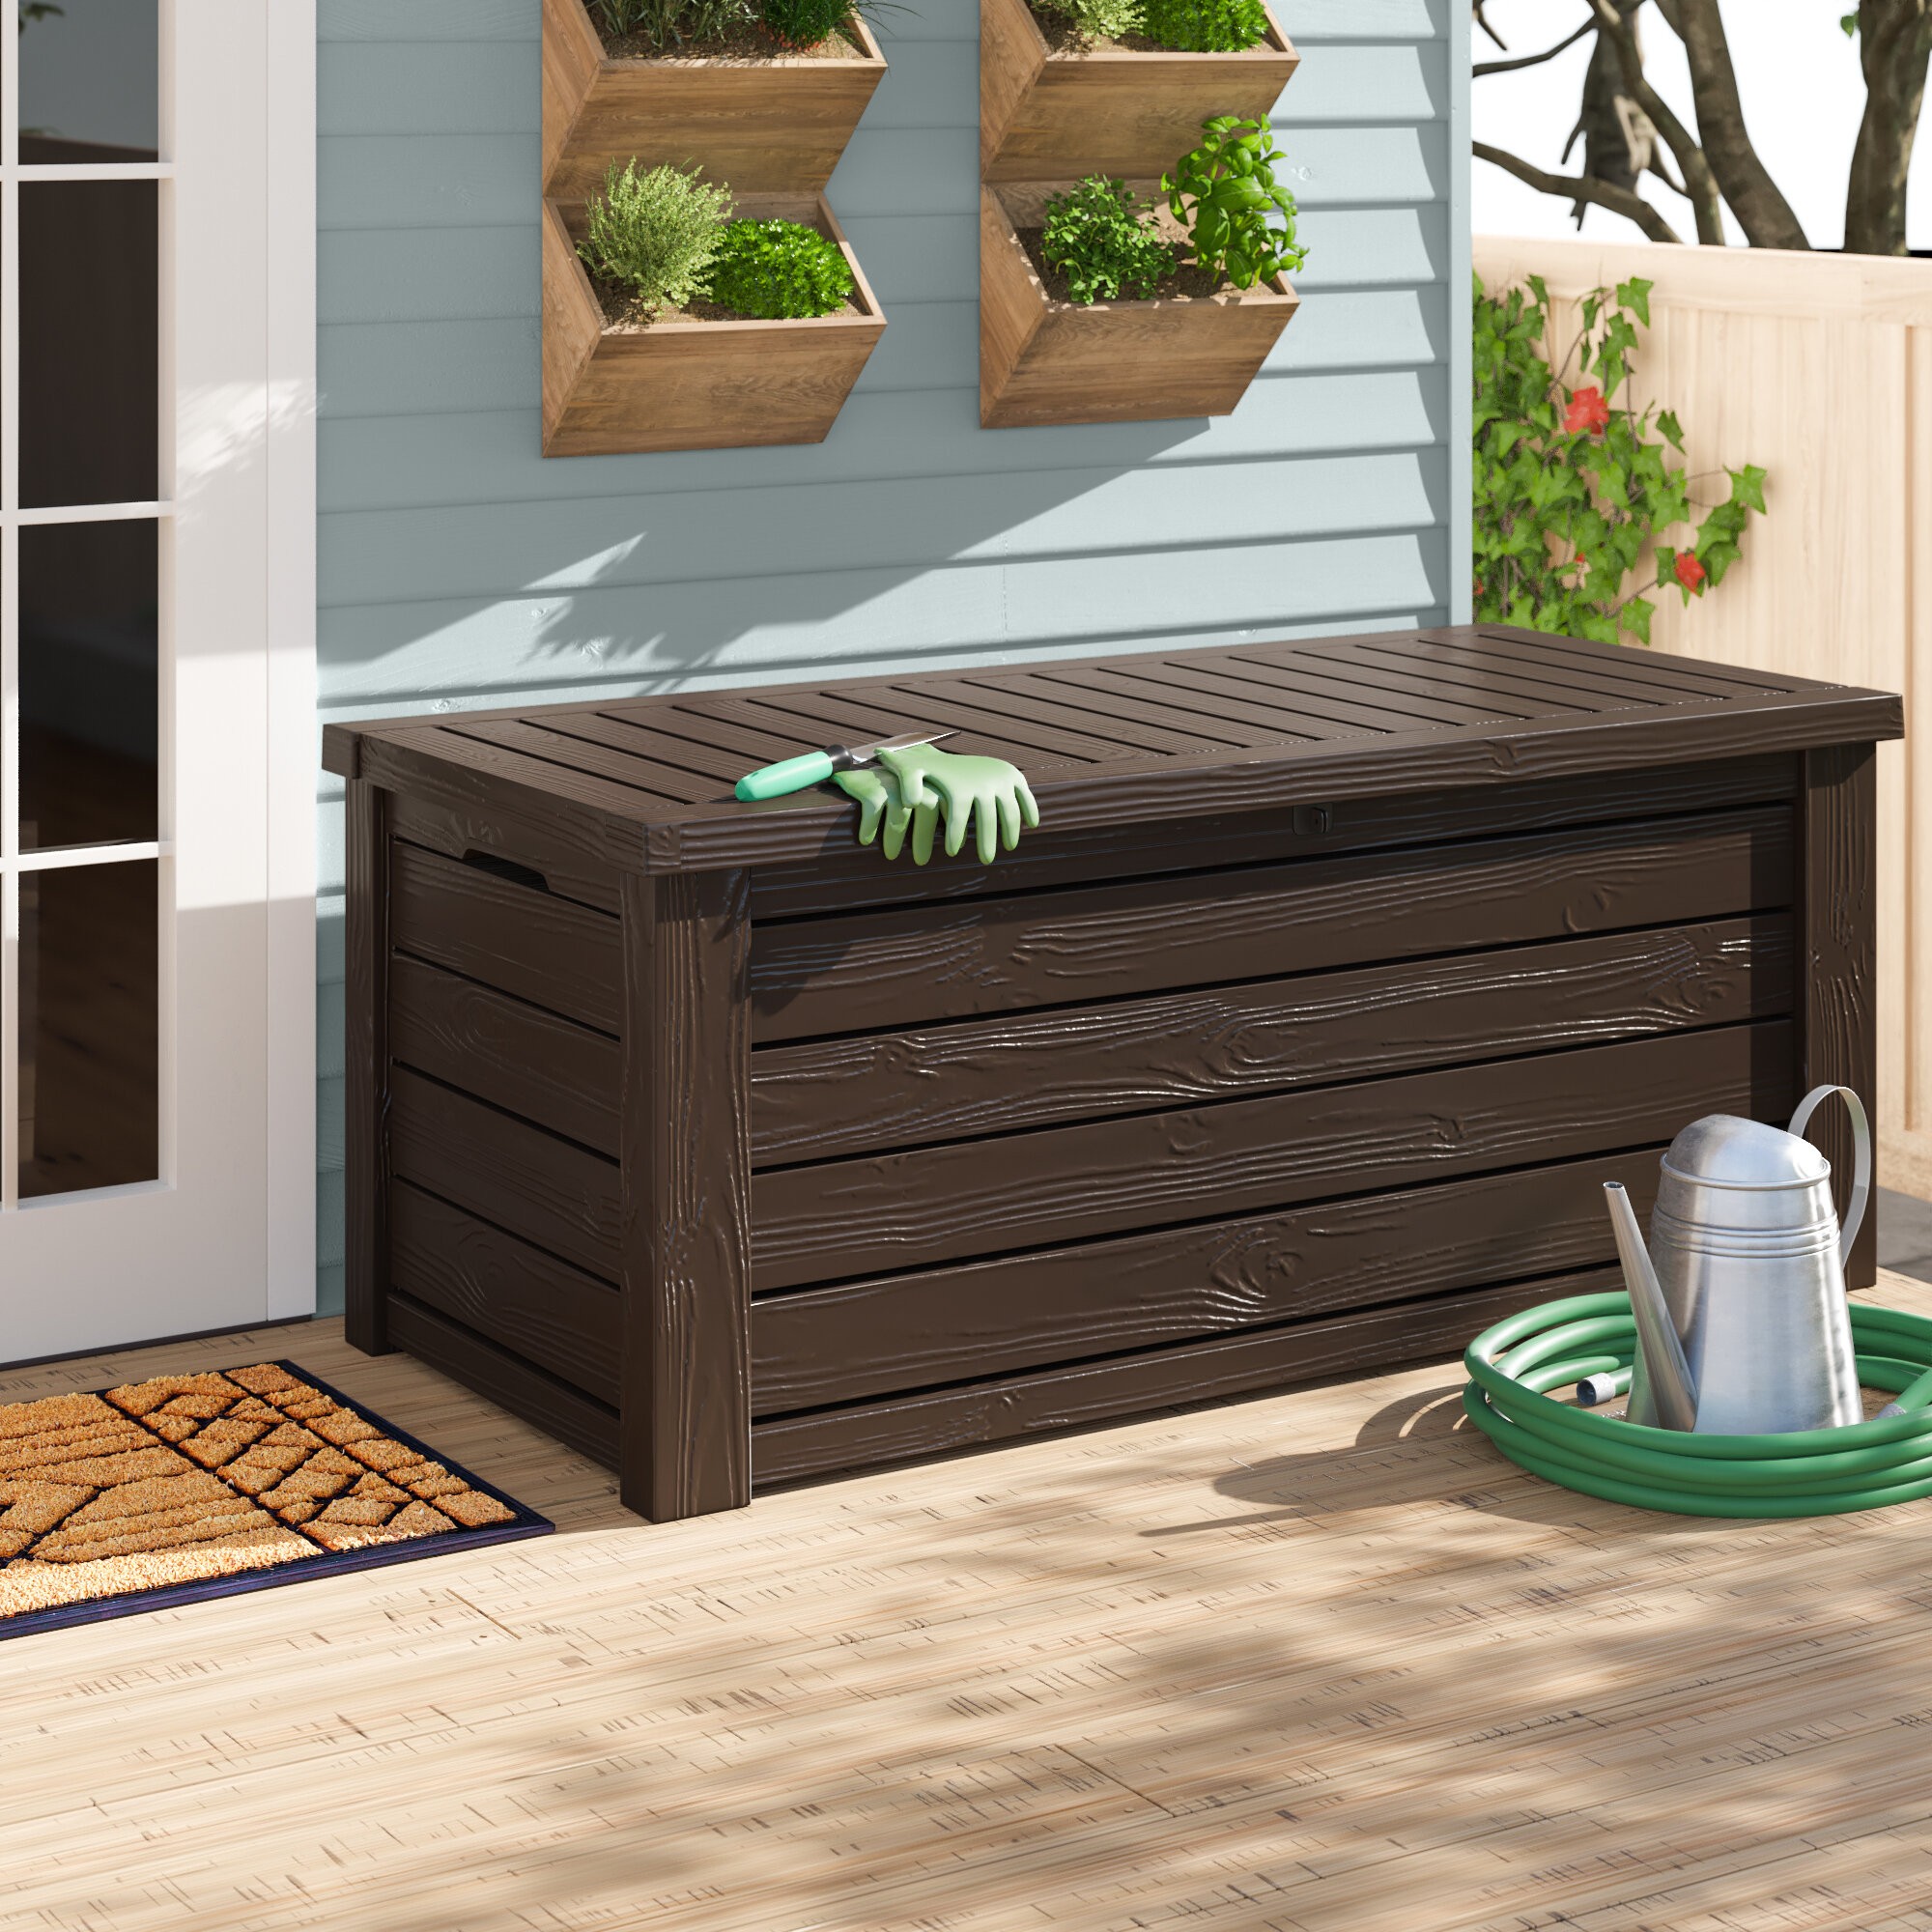 Details about   111 Gal Garden Plastic Storage Box Utility Chest Cushion Shed Patio Deck Cabinet 